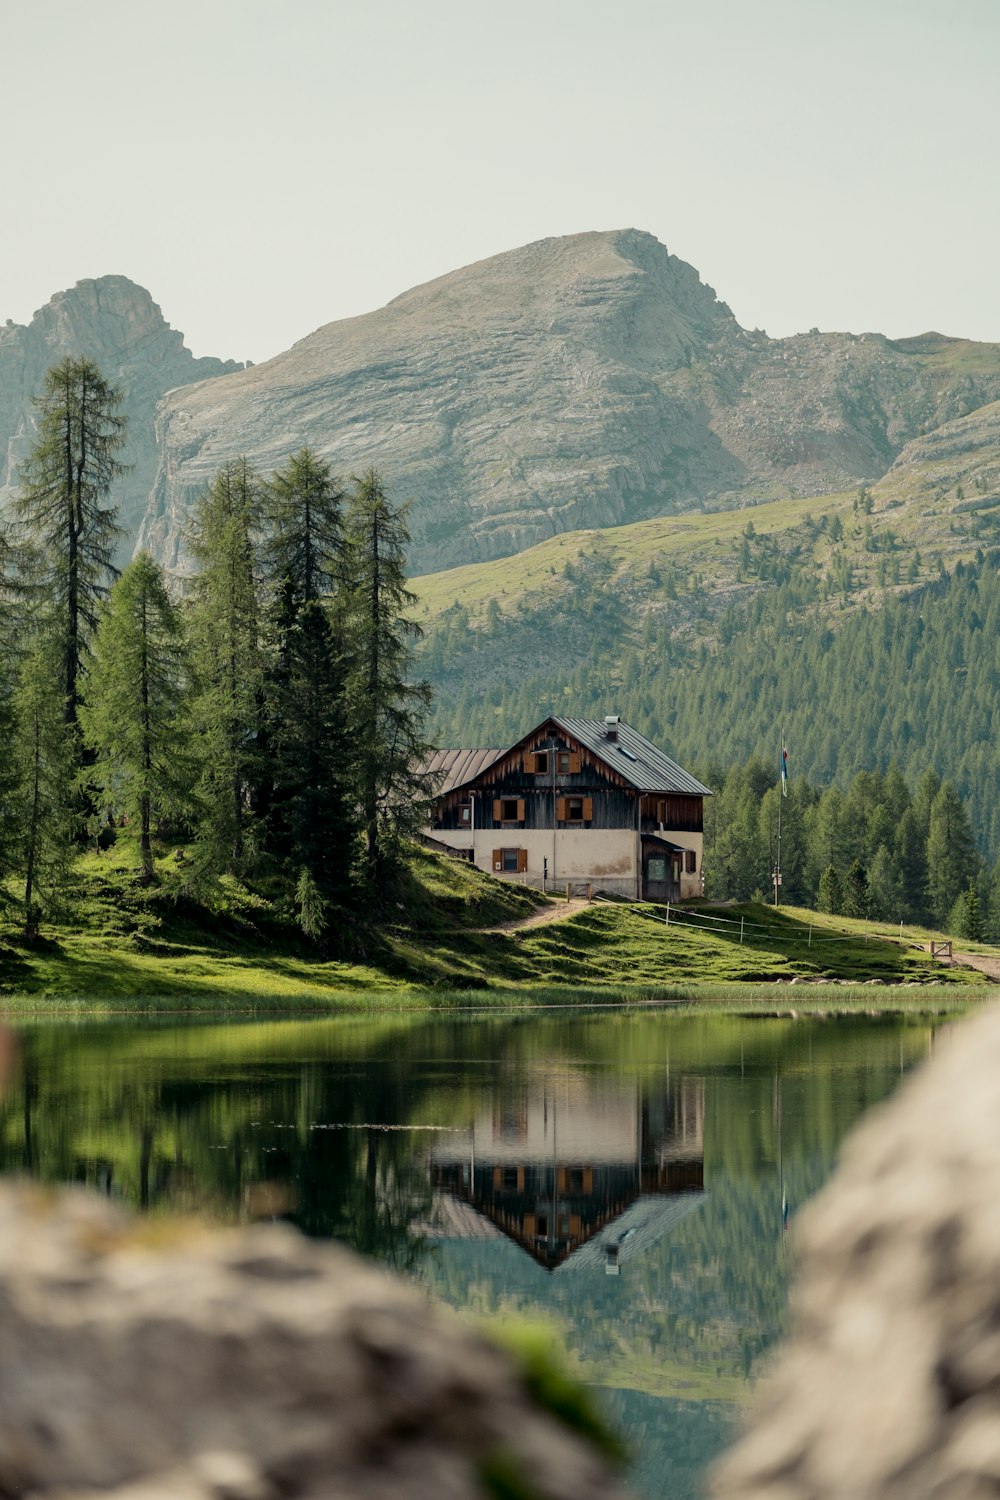 a house on a hill by a lake with trees and mountains in the background